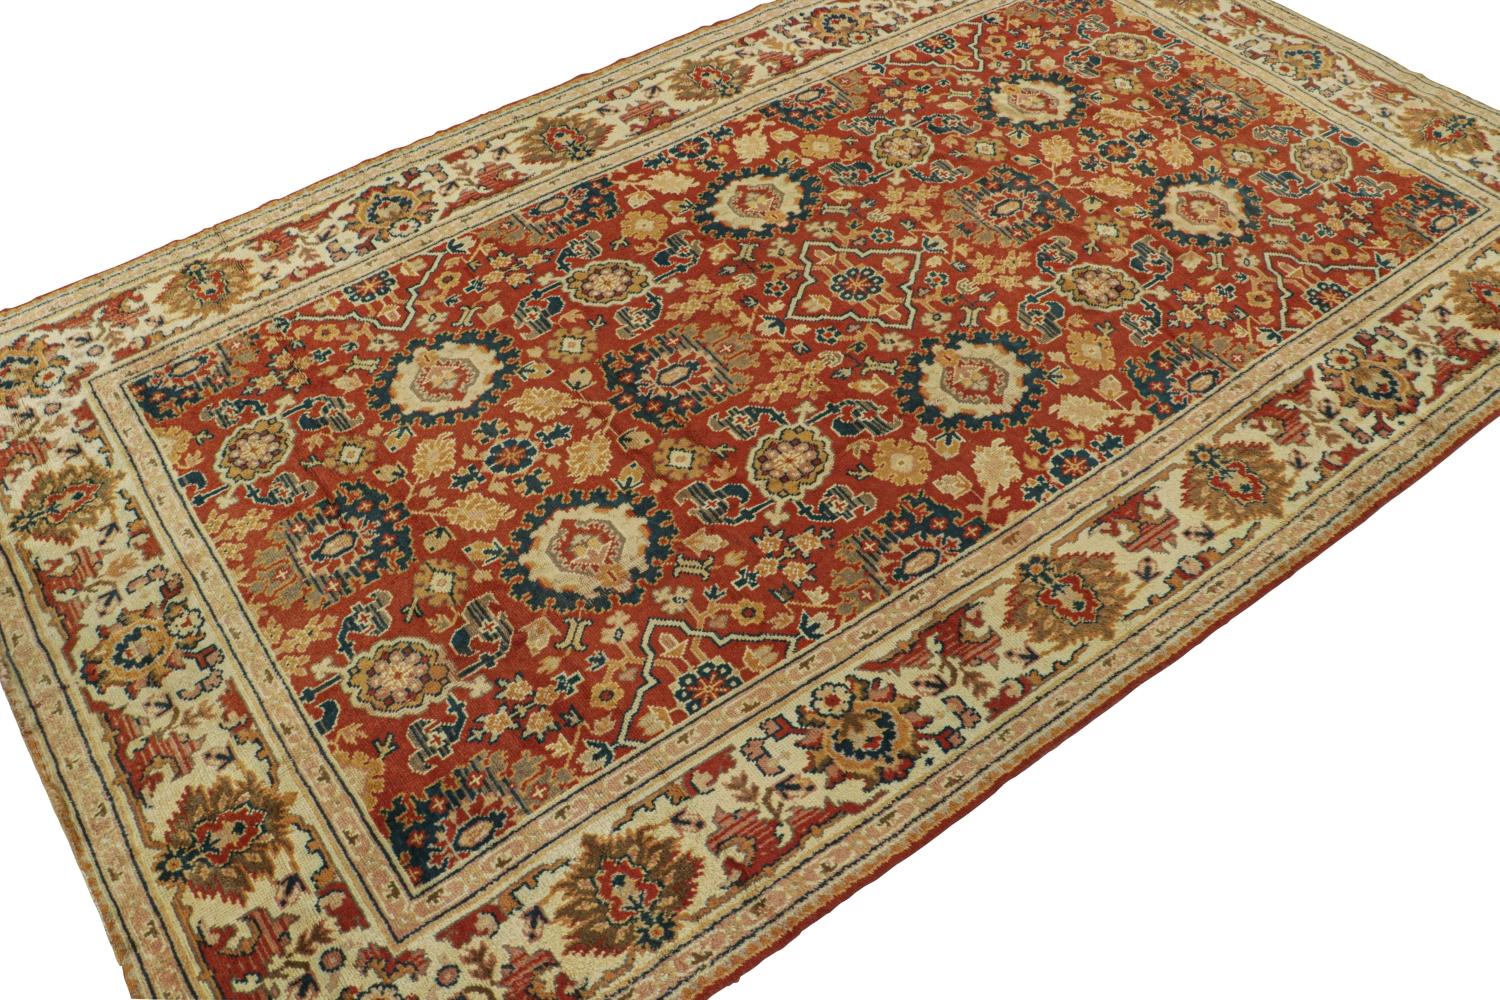 Antique Arts & Crafts Rug in Rust with Floral Patterns In Good Condition For Sale In Long Island City, NY